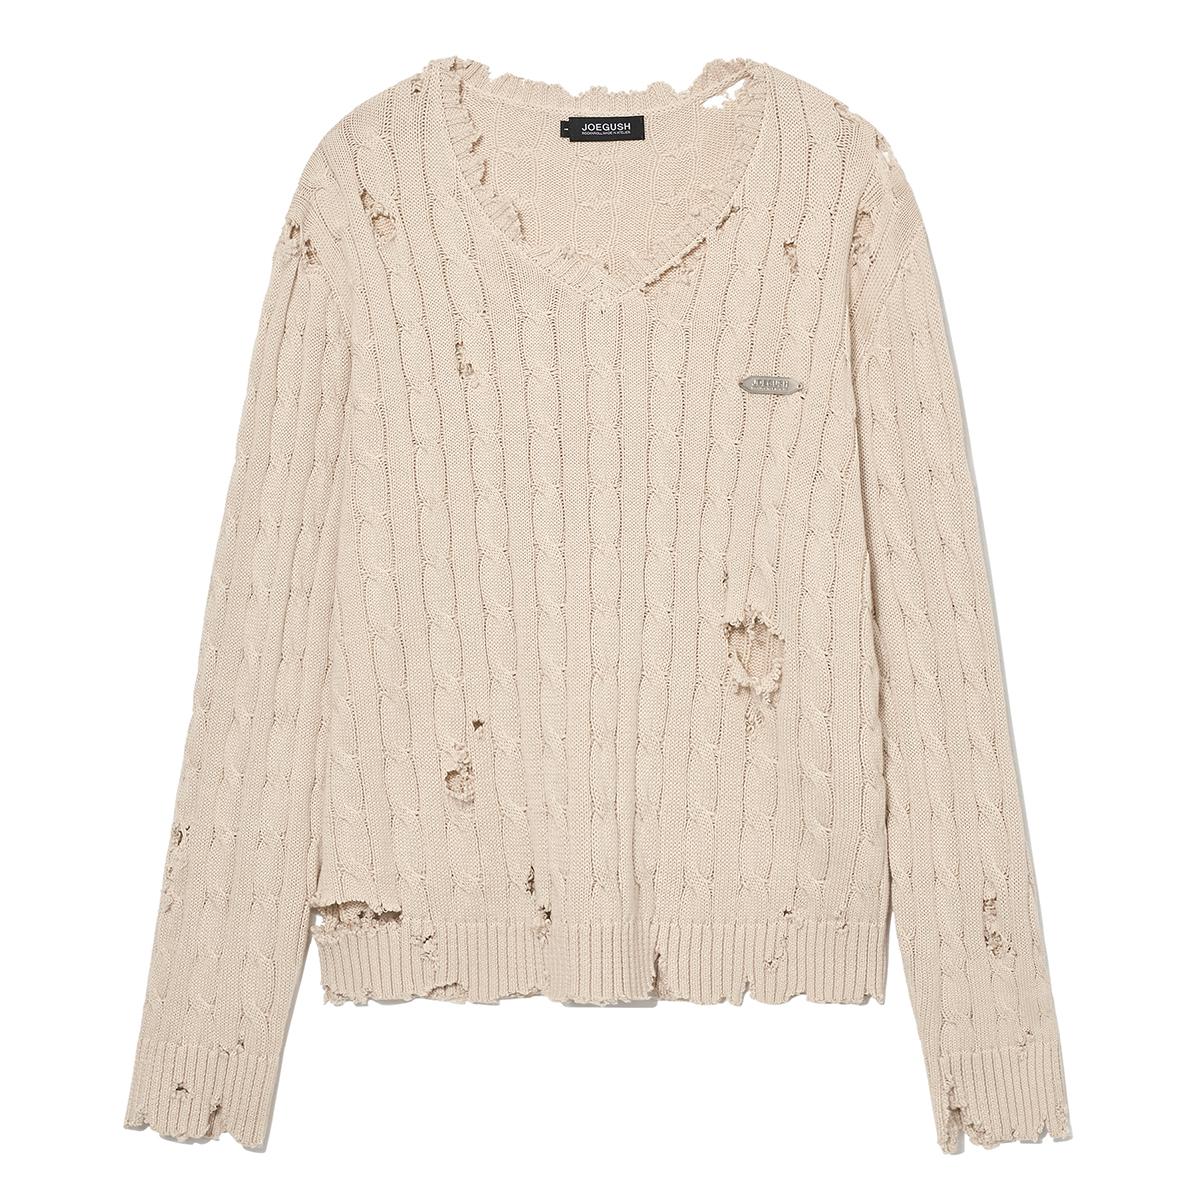 Distressed Cable knit LV.2 (Ivory) [04/03 배송]